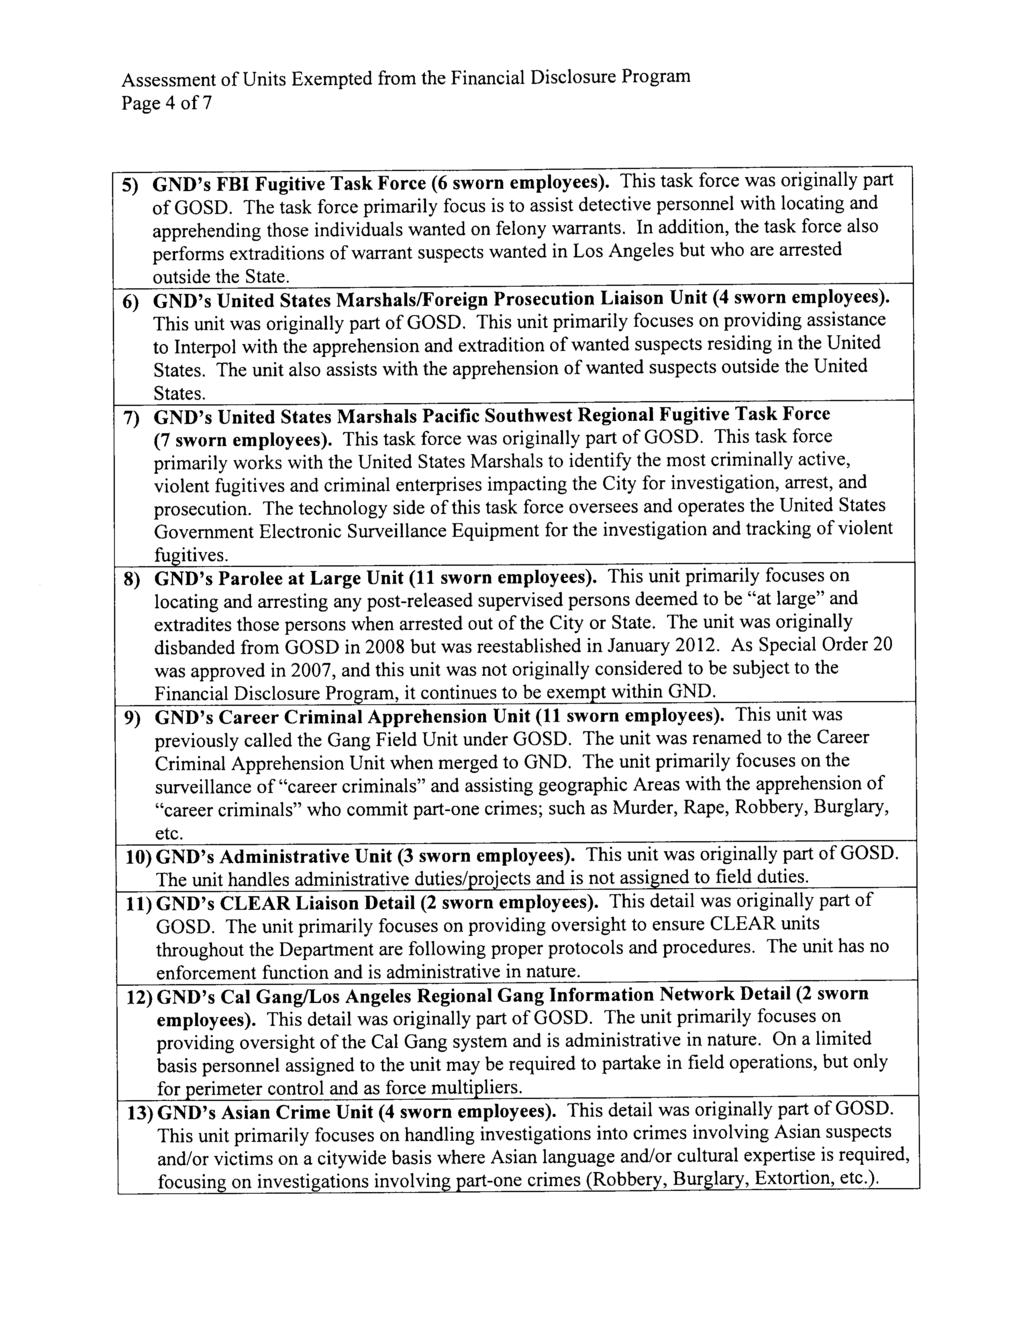 Page 4 of 7 5) GND's FBI Fugitive Task Force (6 sworn employees). This task force was originally part of GOSD.